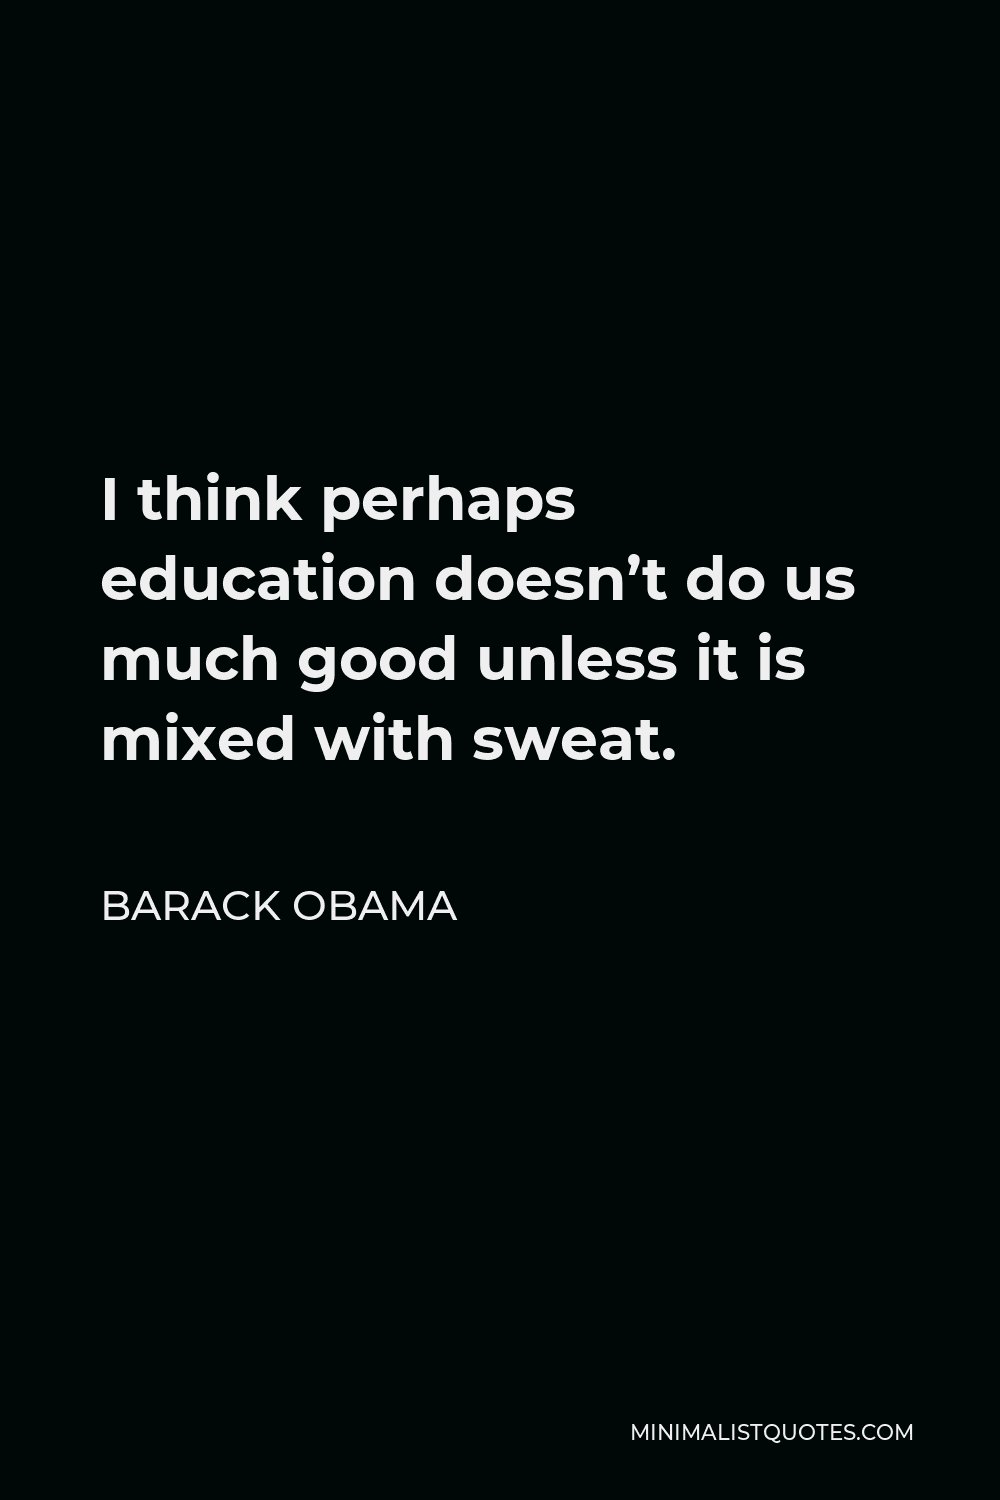 Barack Obama Quote - I think perhaps education doesn’t do us much good unless it is mixed with sweat.